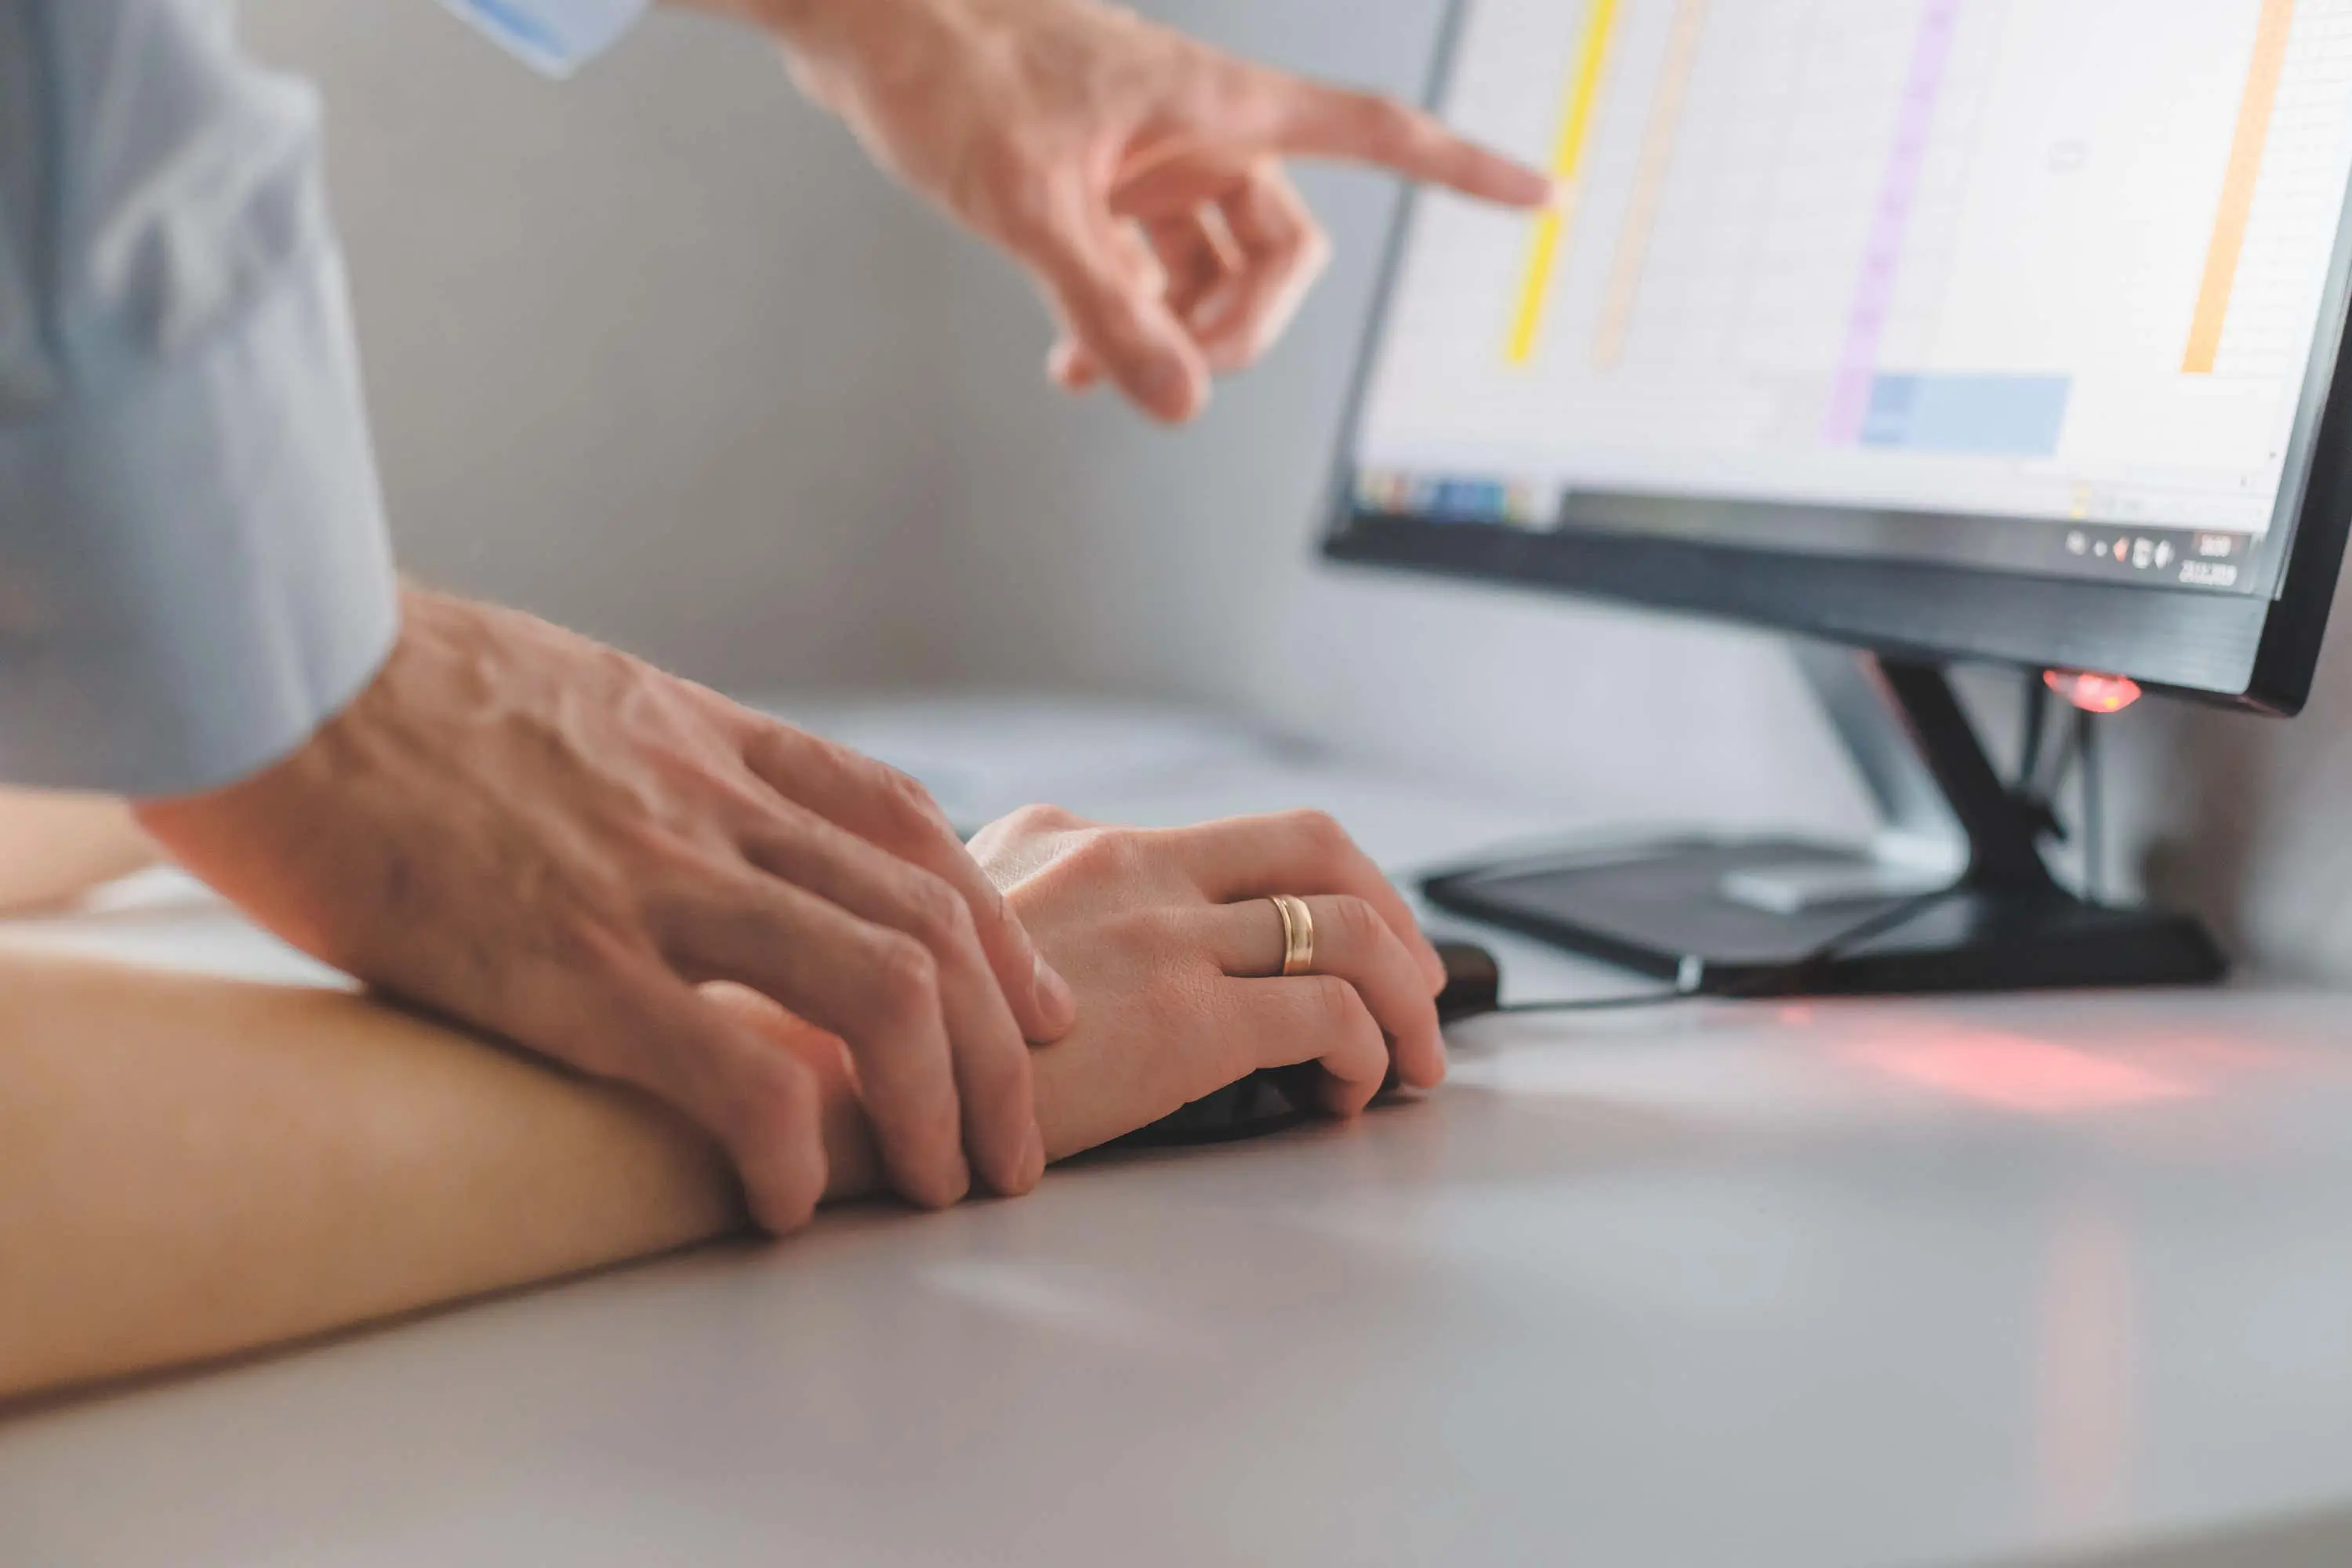 Hand holds wrist of person in work scaled